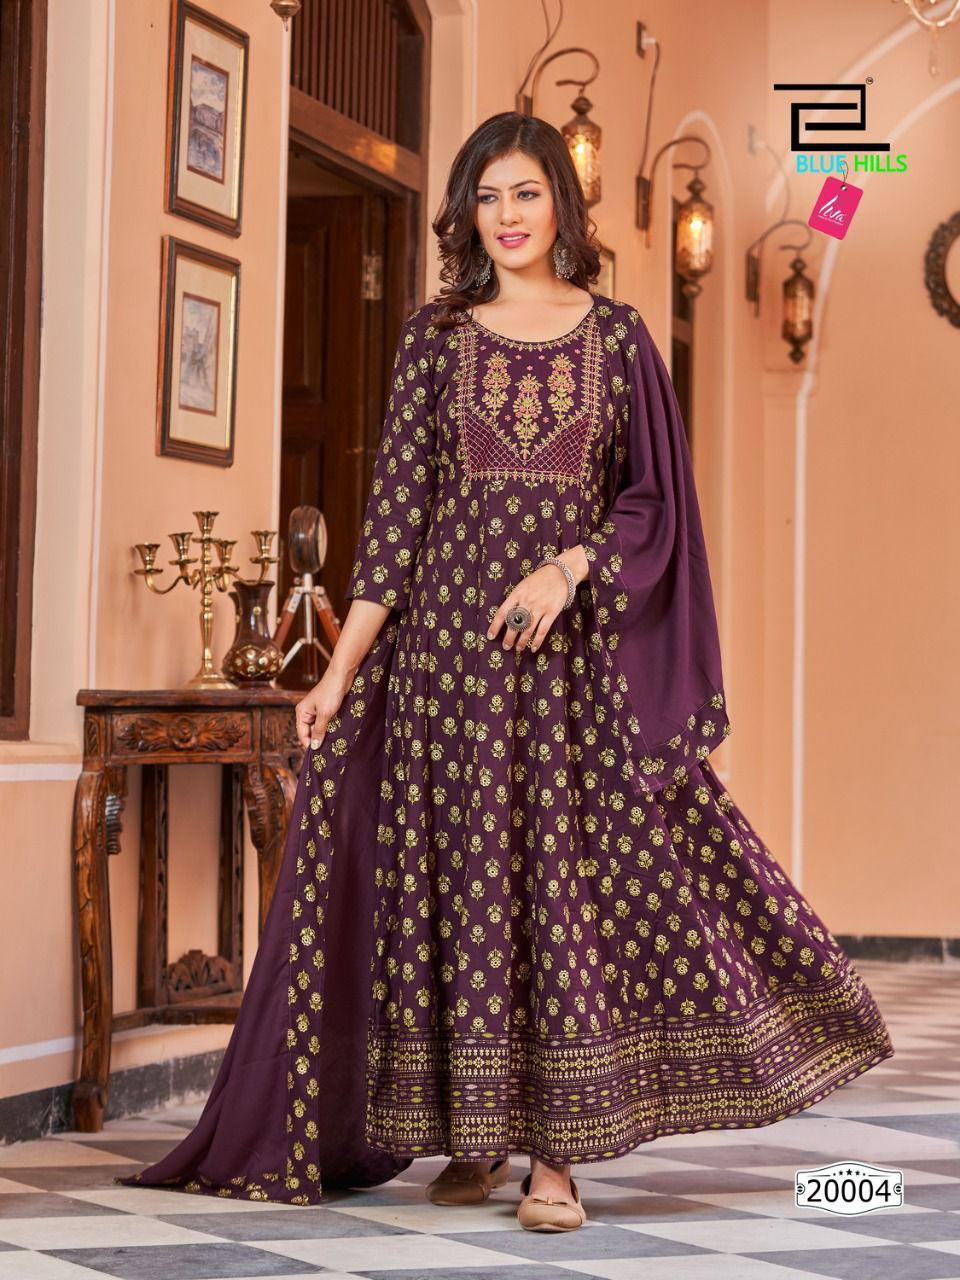 BLUE HILLS GLAMOUR VOL 20 NX GOWN Anant Tex Exports Private Limited